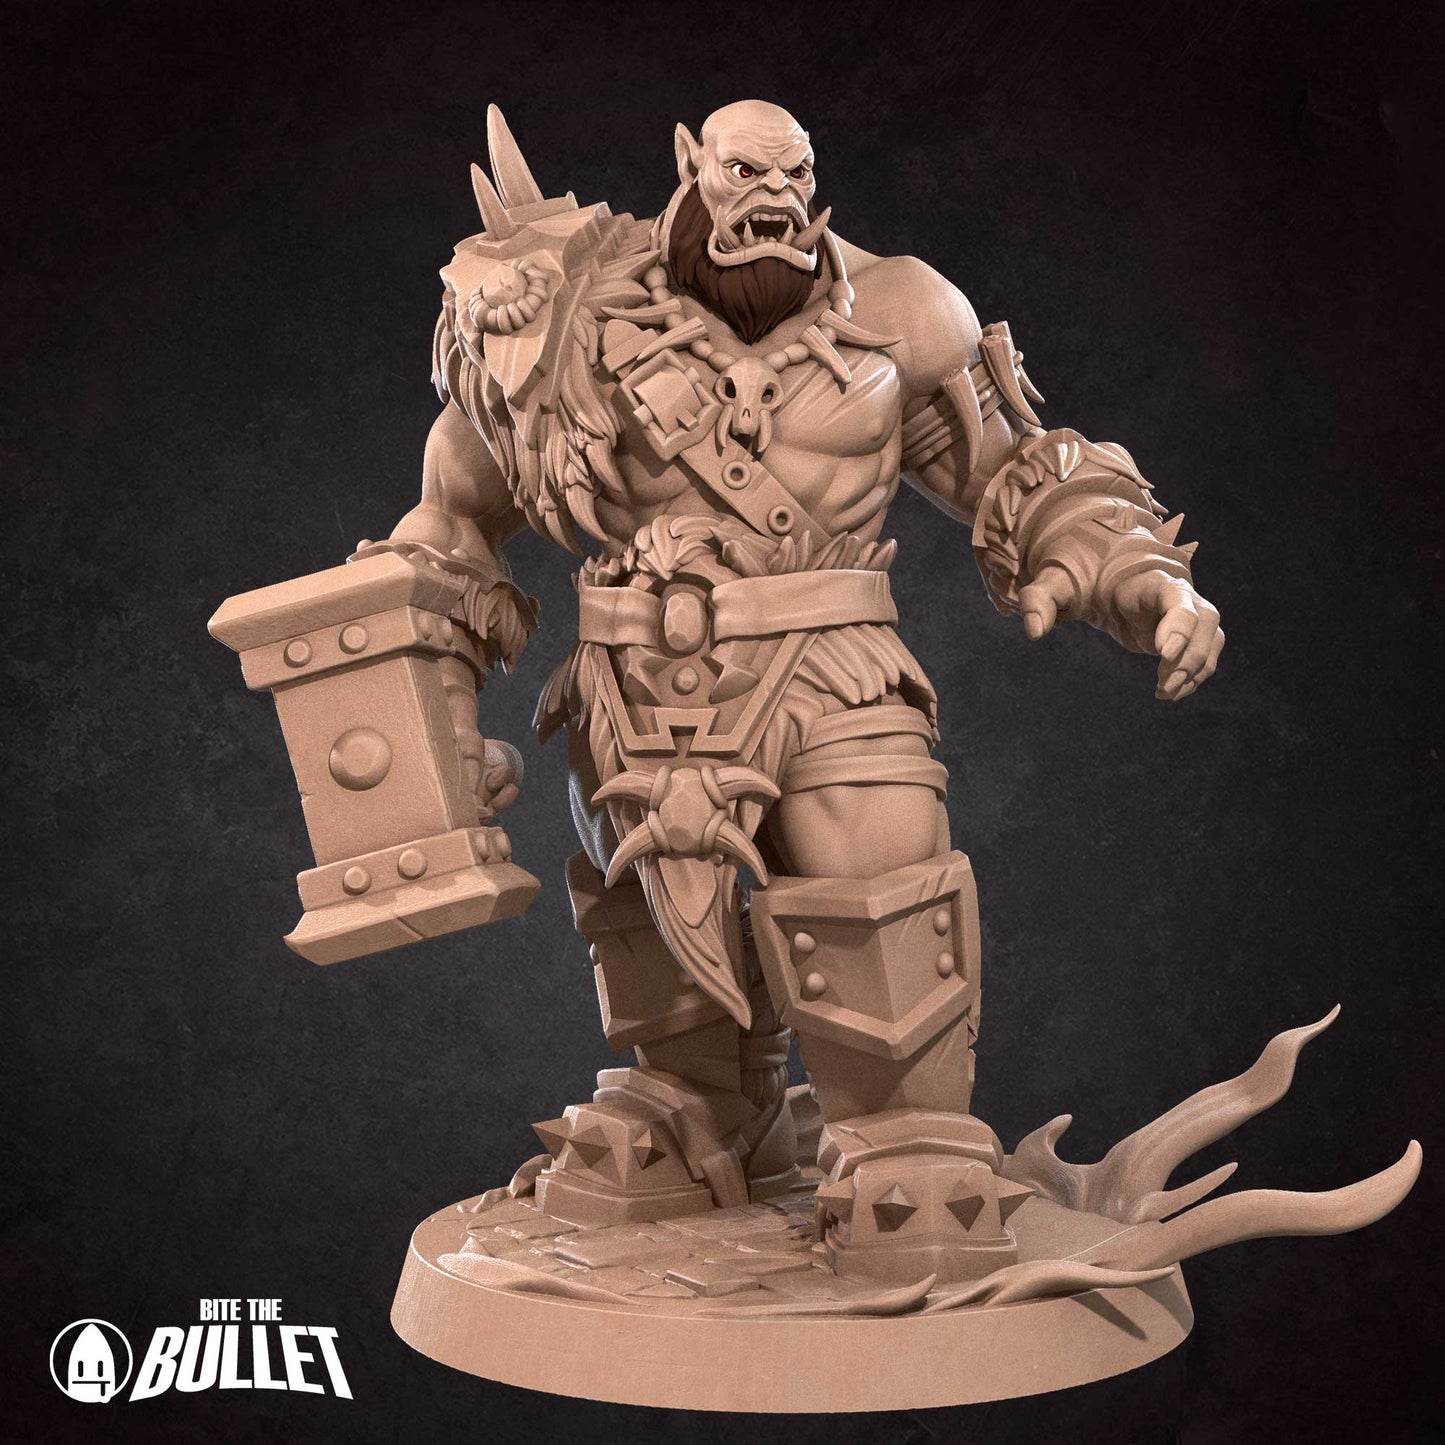 DnD Barbarian - Fighter - Miniature - Orc - Paladin Durgash  Barbarian - Fighter - Miniature - Orc - Paladin sold by DoubleHitShop